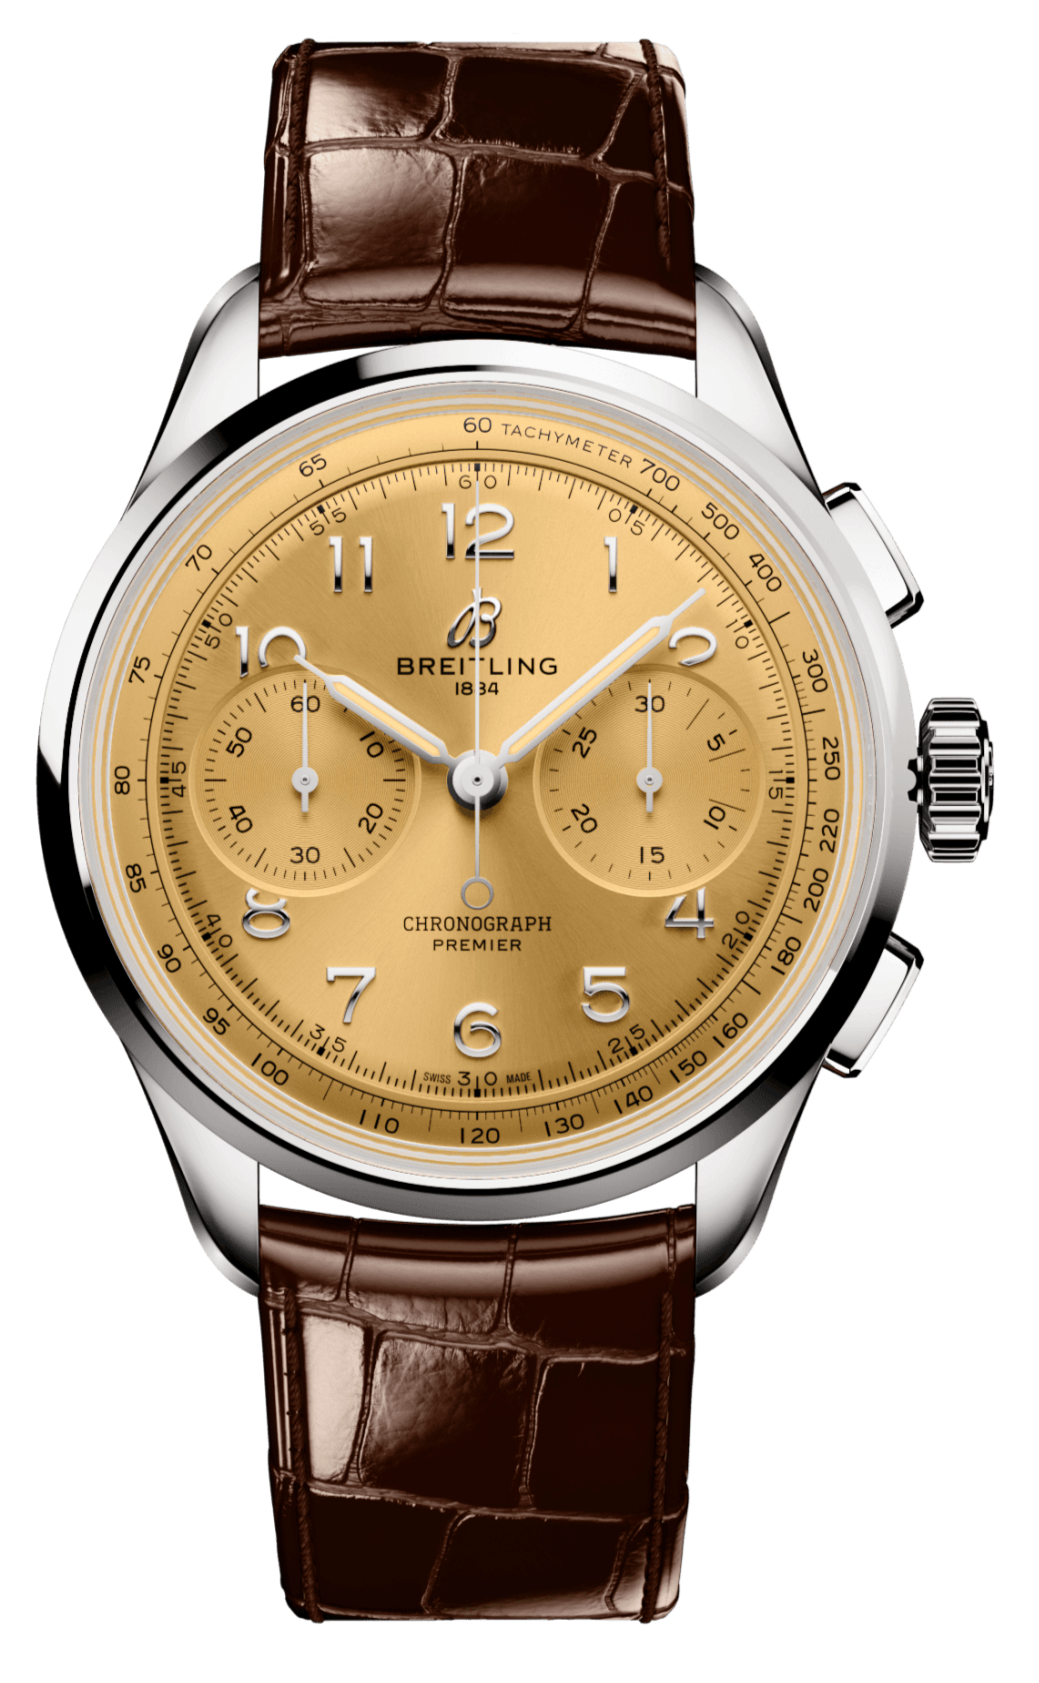 Breitling Premier B09 Chronograph 40 Beige Dial Brown Leather Strap Watch for Men - AB0930F51H1P1